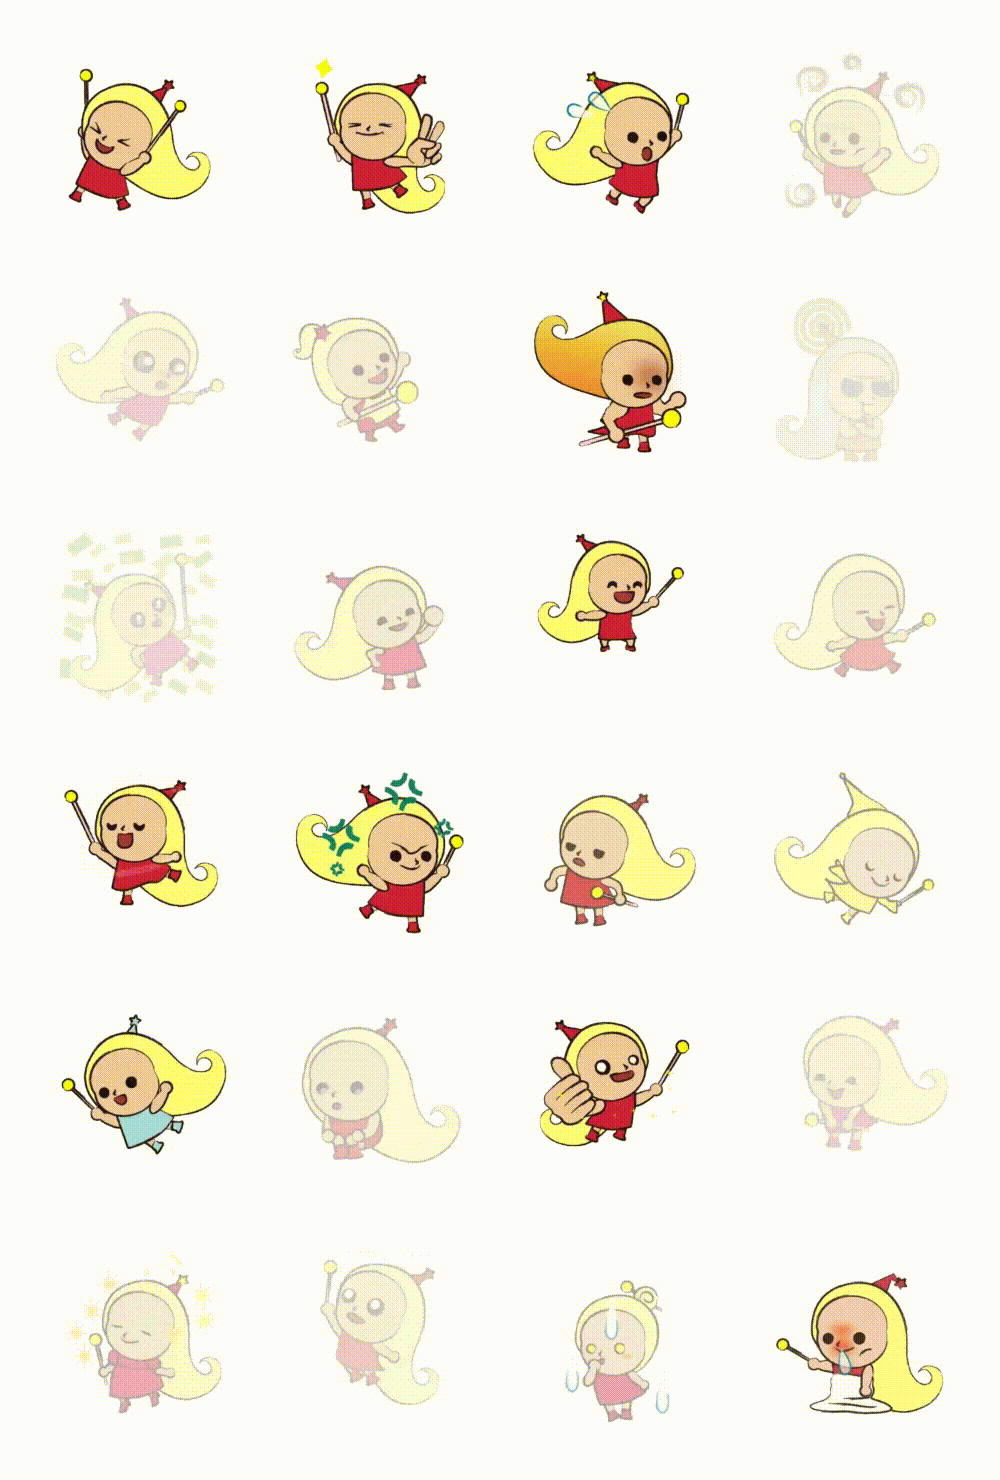 Everything goes well Fairy Animation/Cartoon sticker pack for Whatsapp, Telegram, Signal, and others chatting and message apps